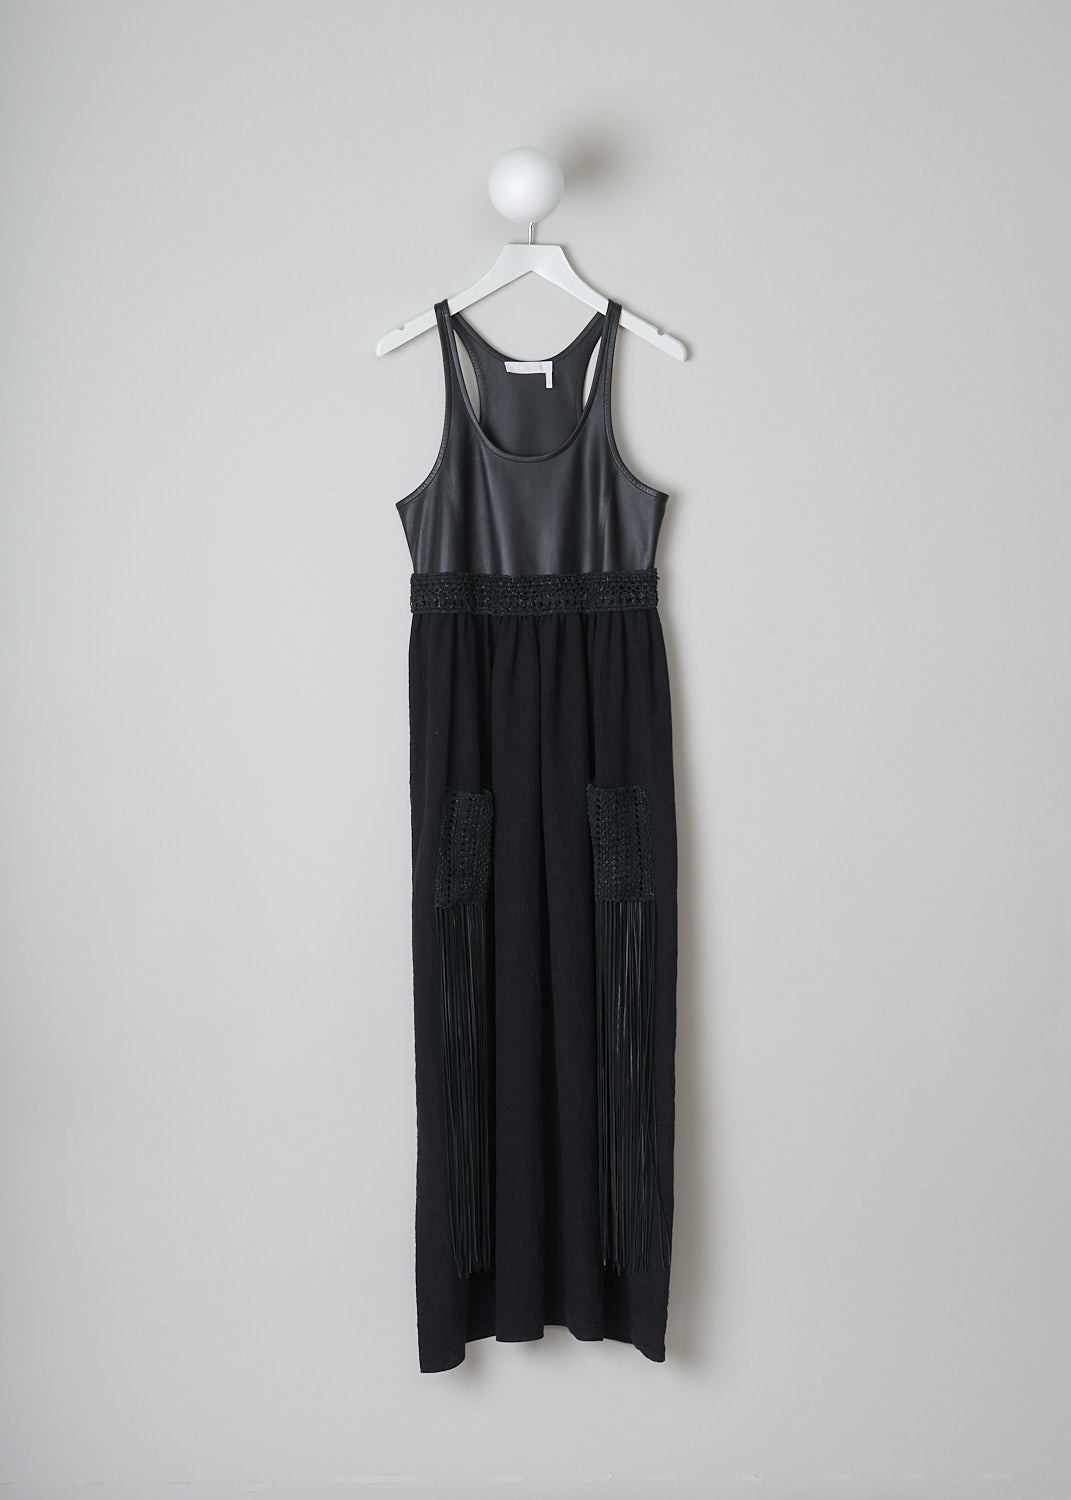 CHLOÃ‰, SLEEVELESS MULTI-FABRIC DRESS, CHC22SRO55035001_BLACK, Black, Front, This sleeveless midi dress has a black leather bodice with a U-neckline. A braided leather belt separates the bodice from the black linen maxi length skirt. On the skirt, two braided leather patch pockets with long fringes can be found. 

  
